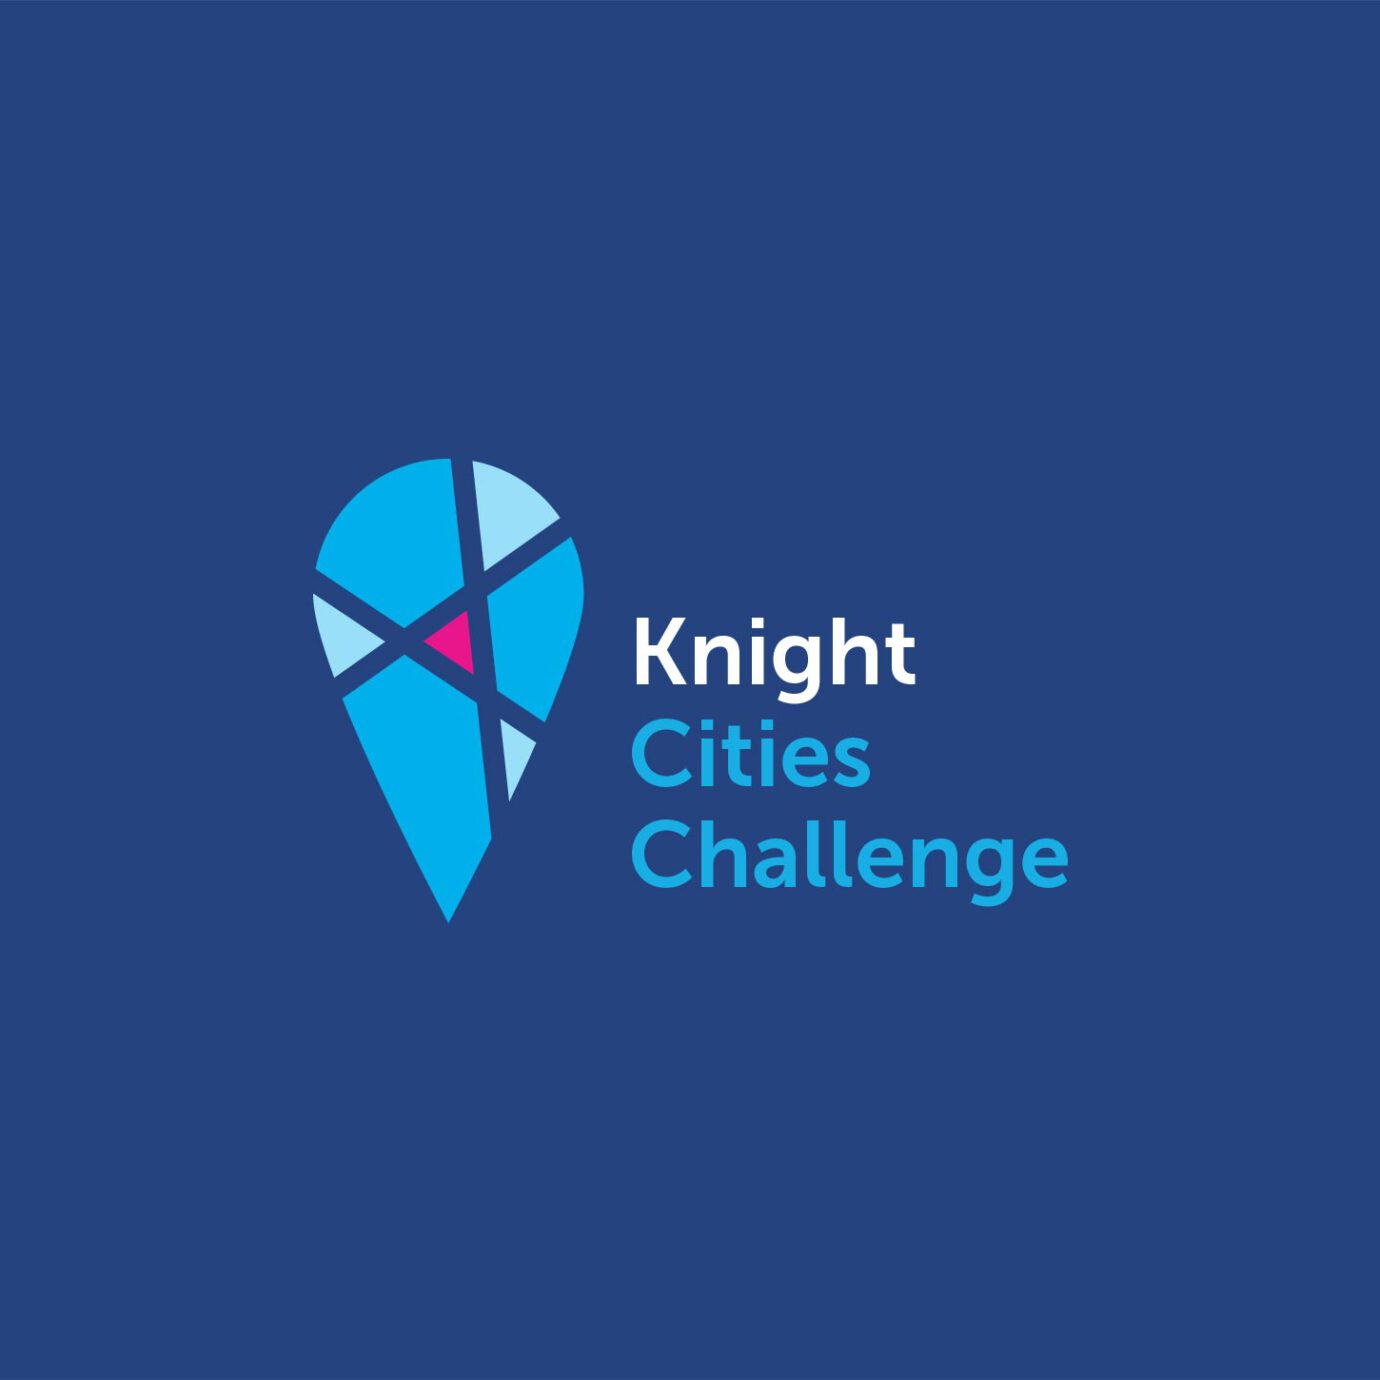 digital design of knight cities challenge logo using a geolocation pin symbol and city street lines next to the stacked name